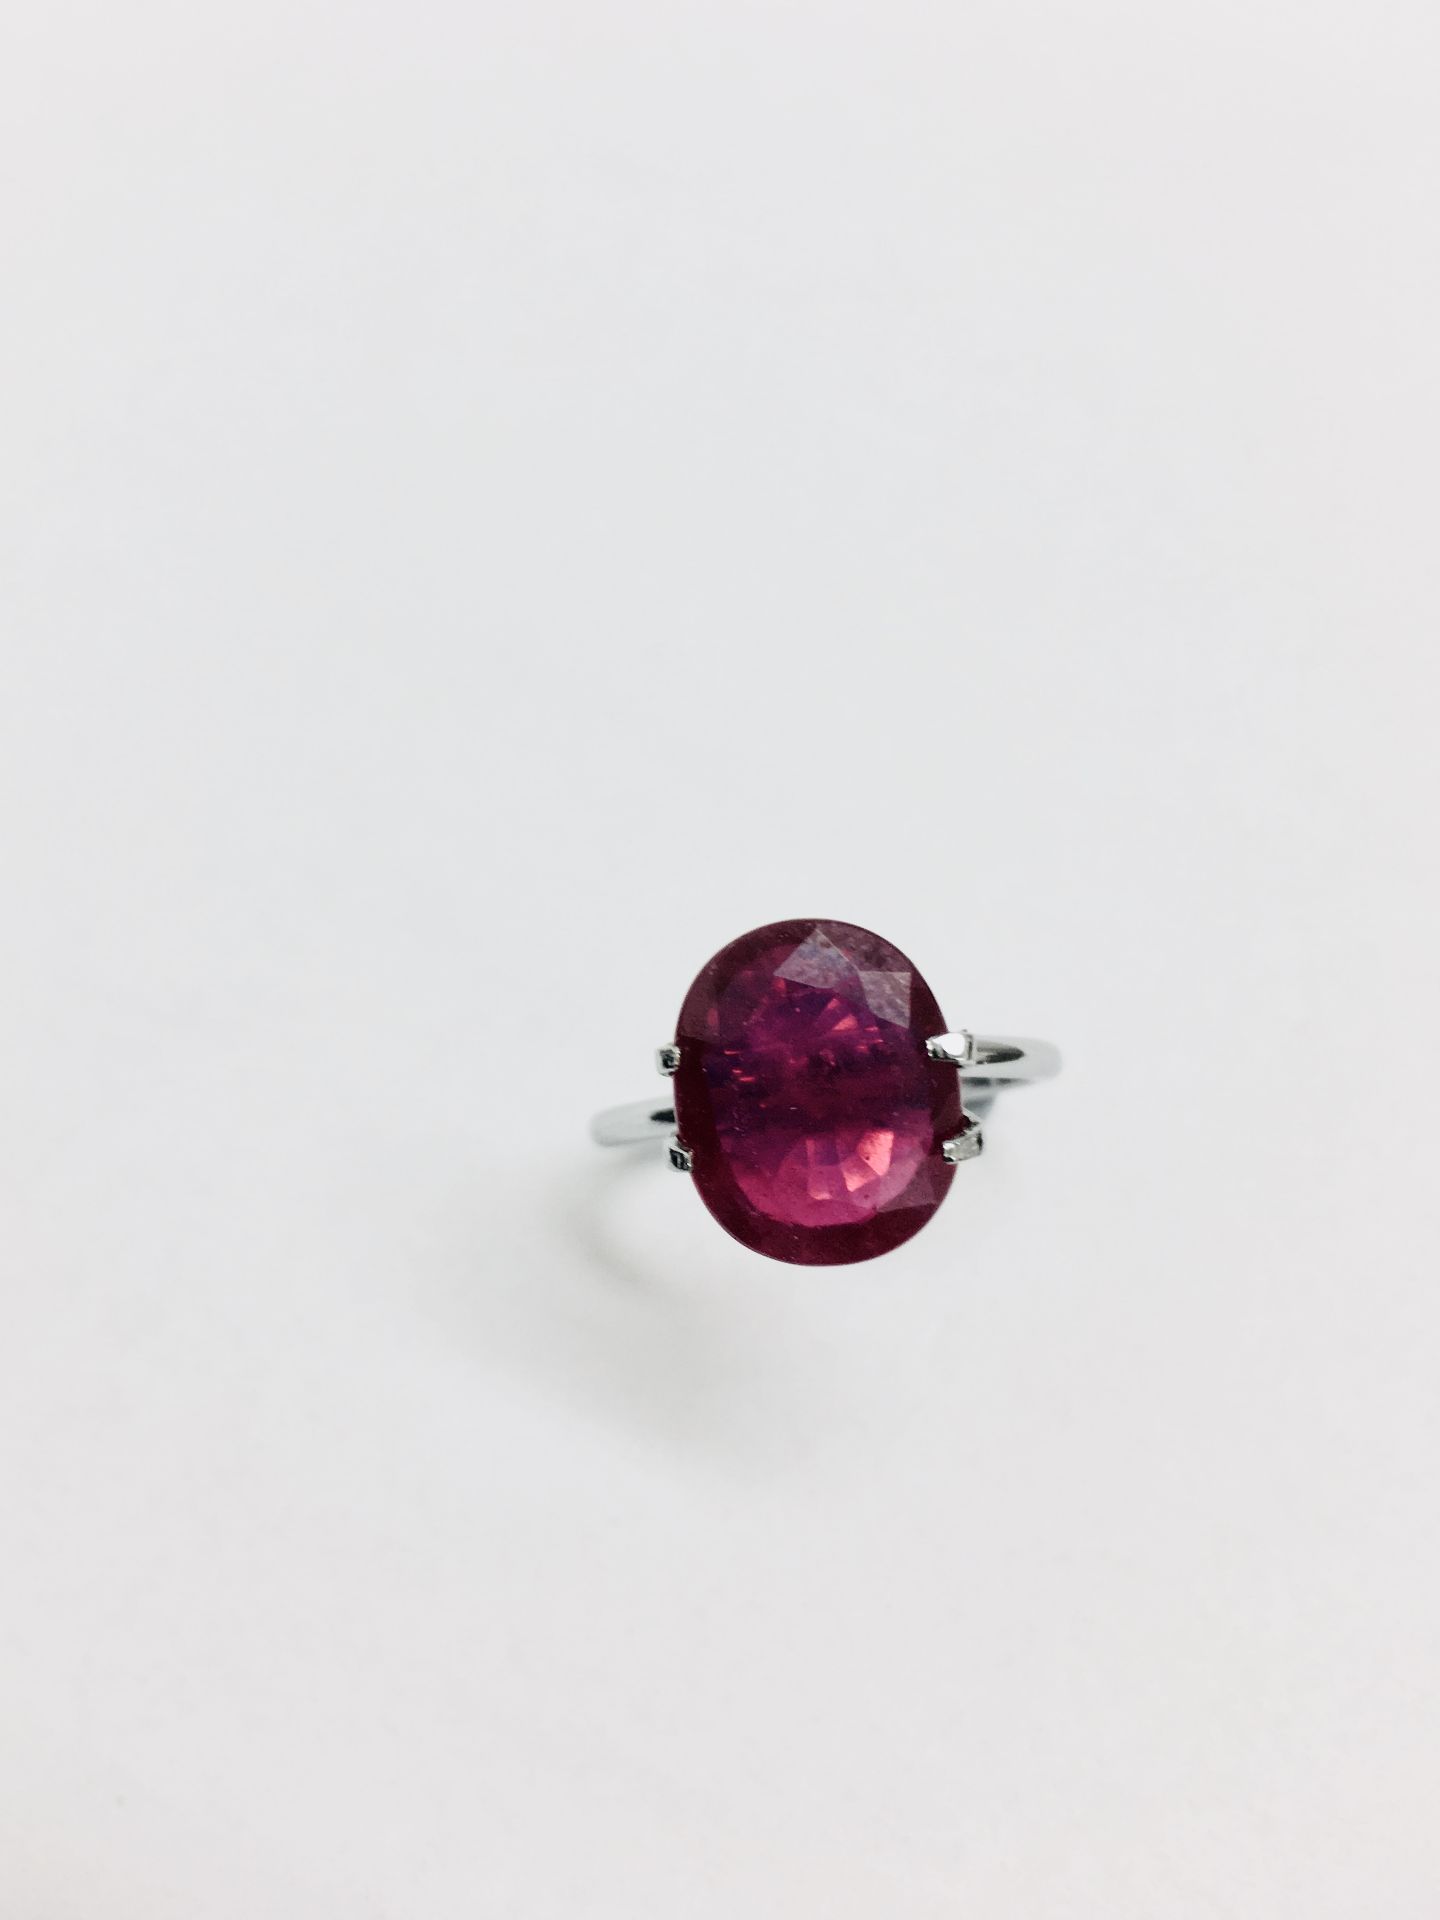 4.02ct ruby,Enhanced by Frature,good clarity and colour,12mmx10mm ,valued at 800 - Image 4 of 4